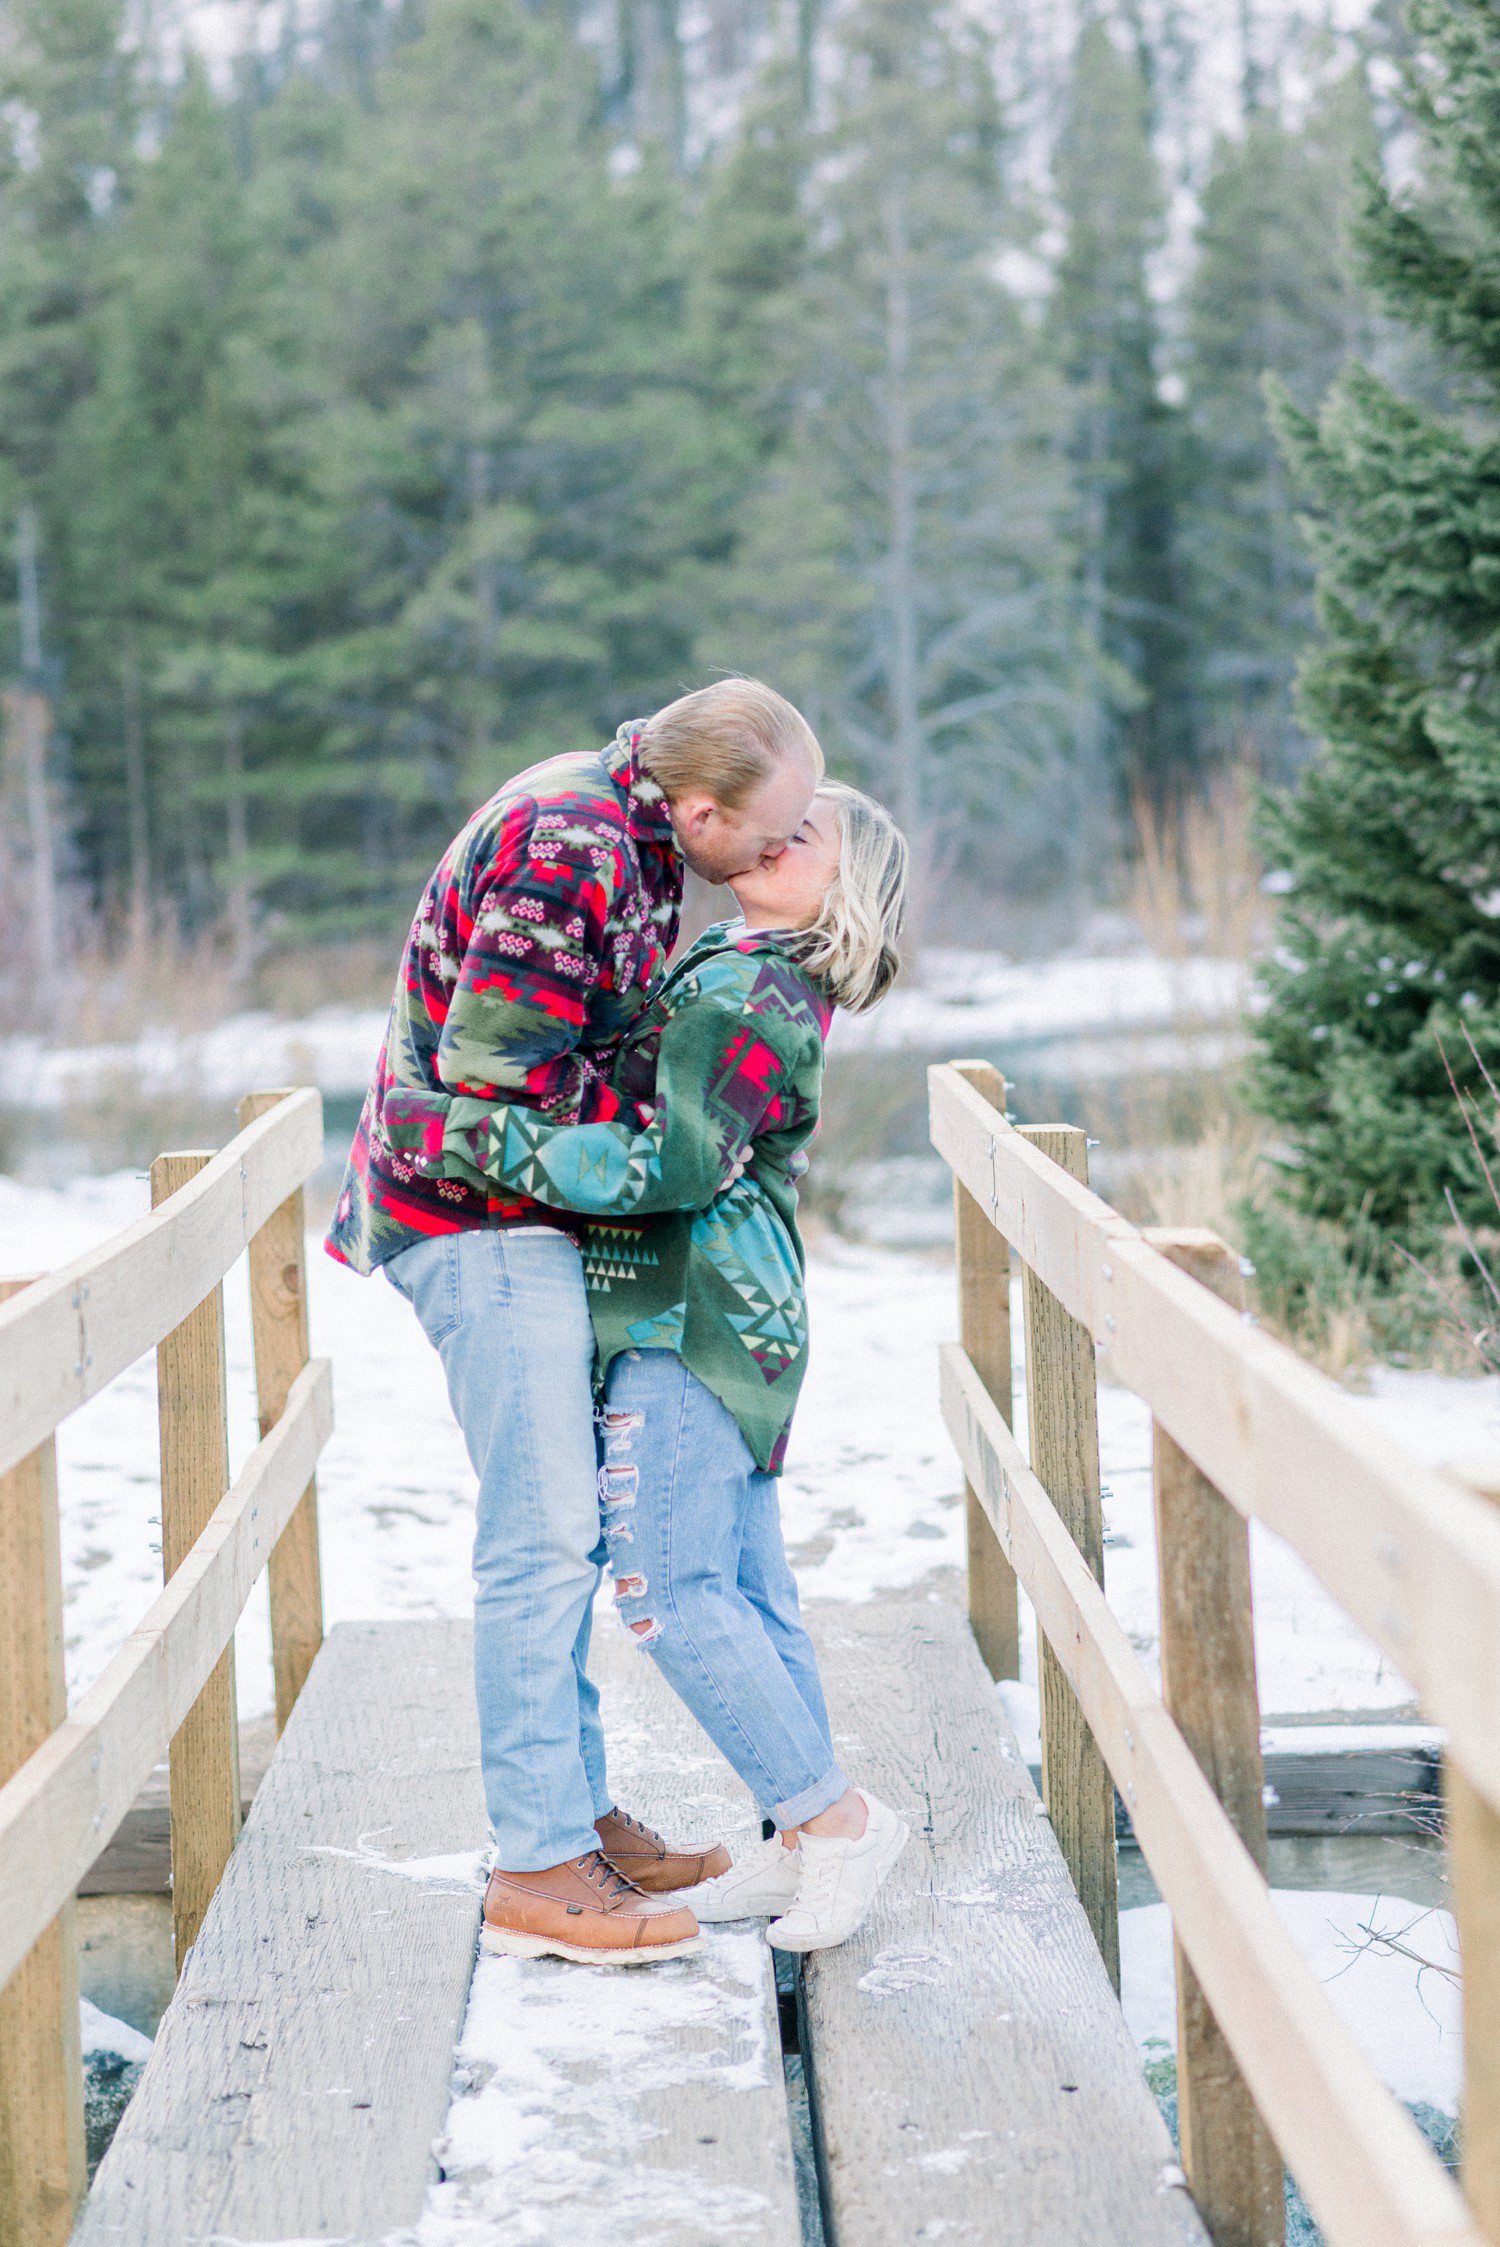 Winter engagement photos at Officer's Gulch in Colorado.